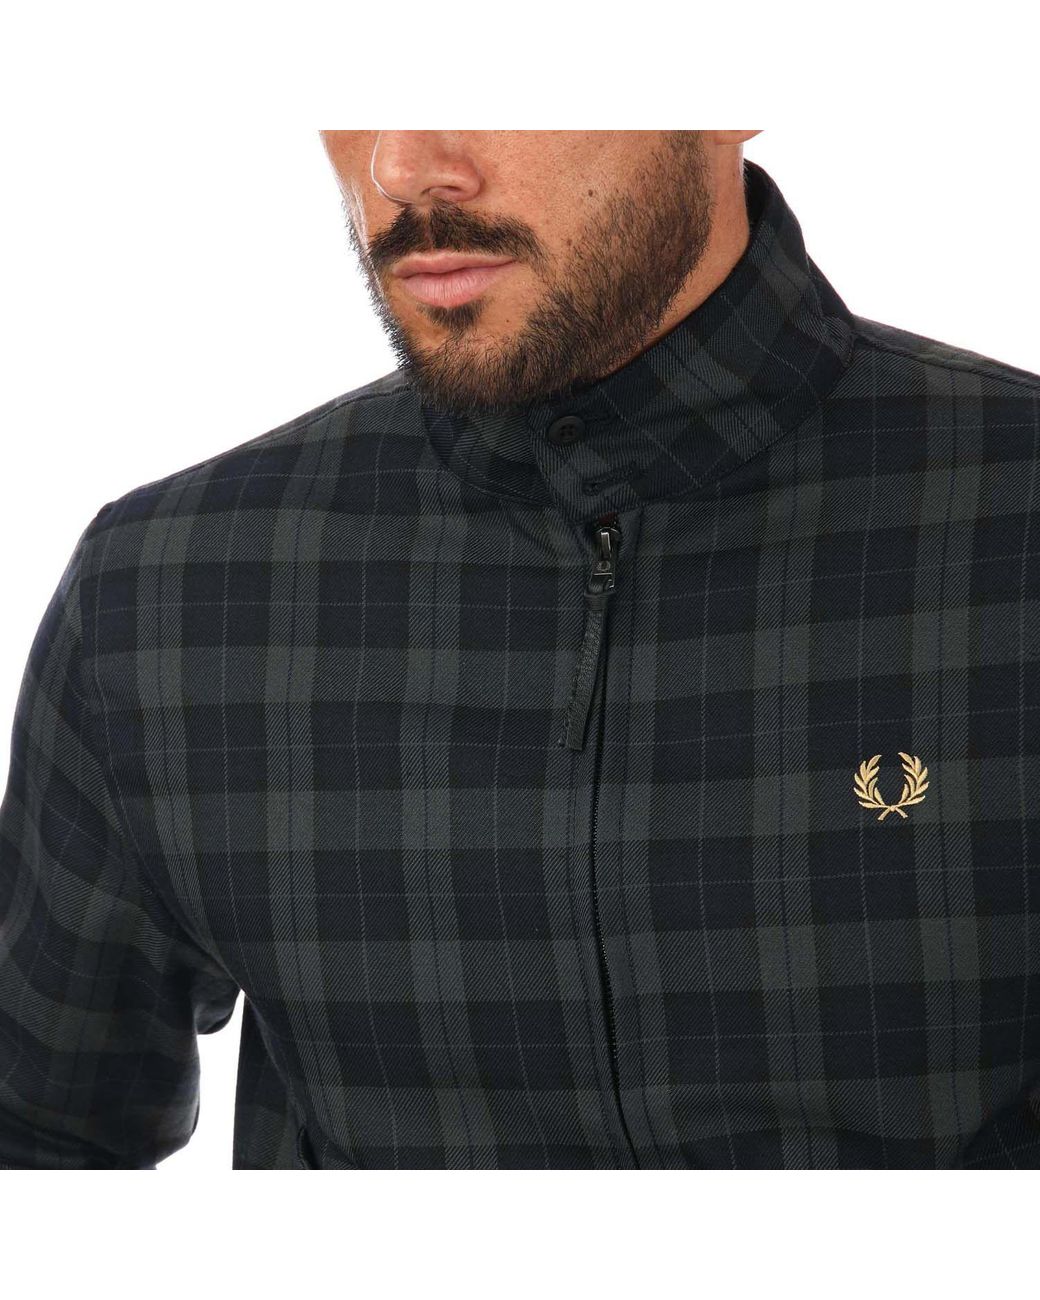 Fred Perry Wool Blend Check Harrington Jacket J1534 608, 46% OFF